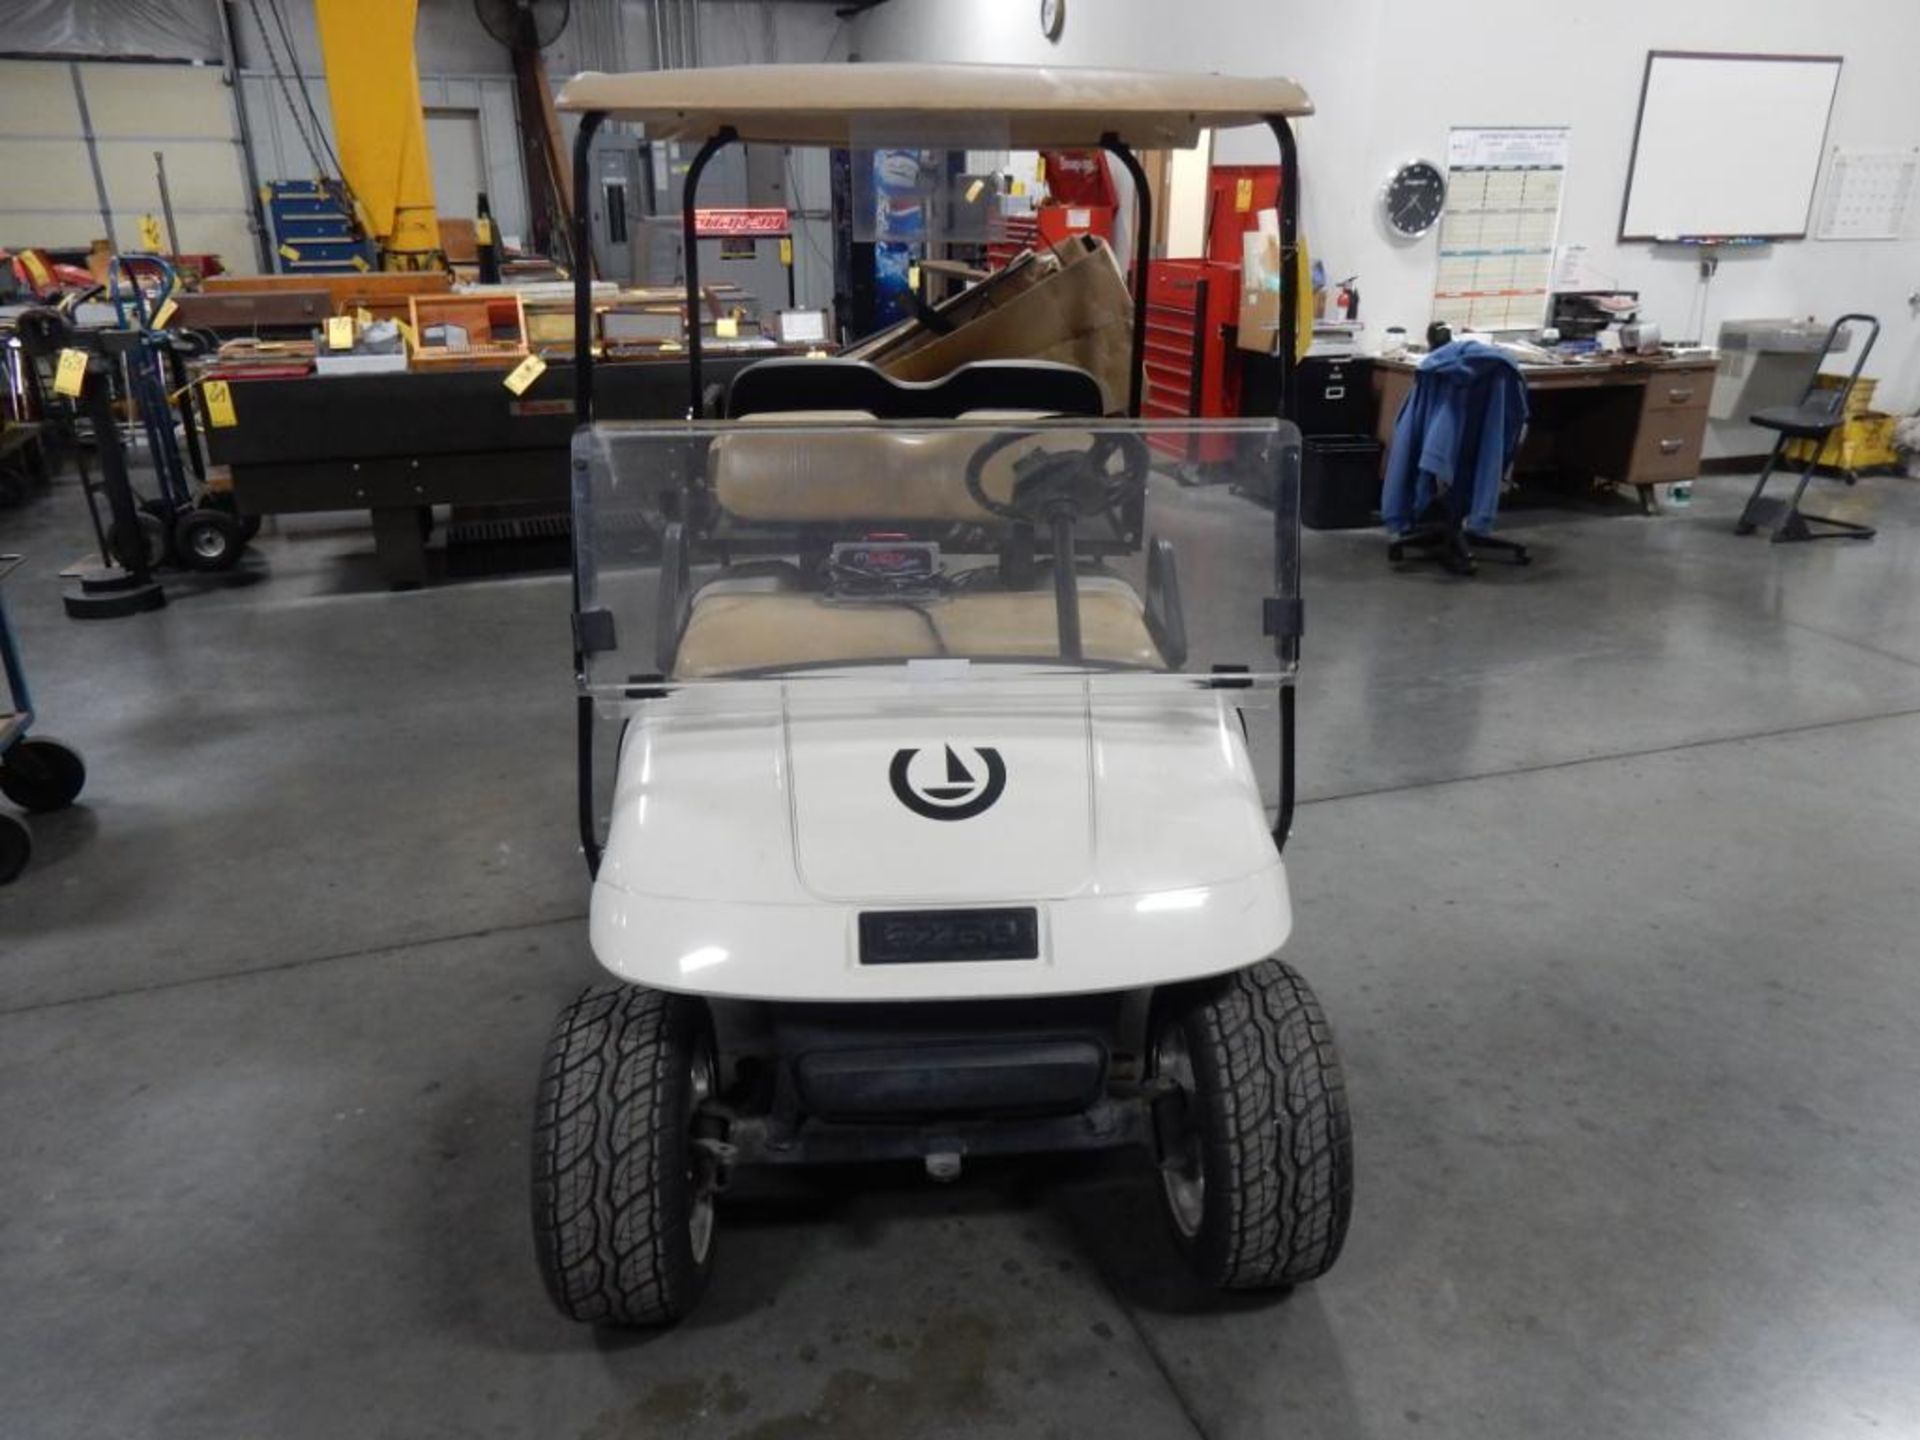 E-Z-GO GOLF CART, CANOPY, REAR FLIP SEAT, MAG WHEELS, WINDSHIELD, CHARGER - Image 3 of 6